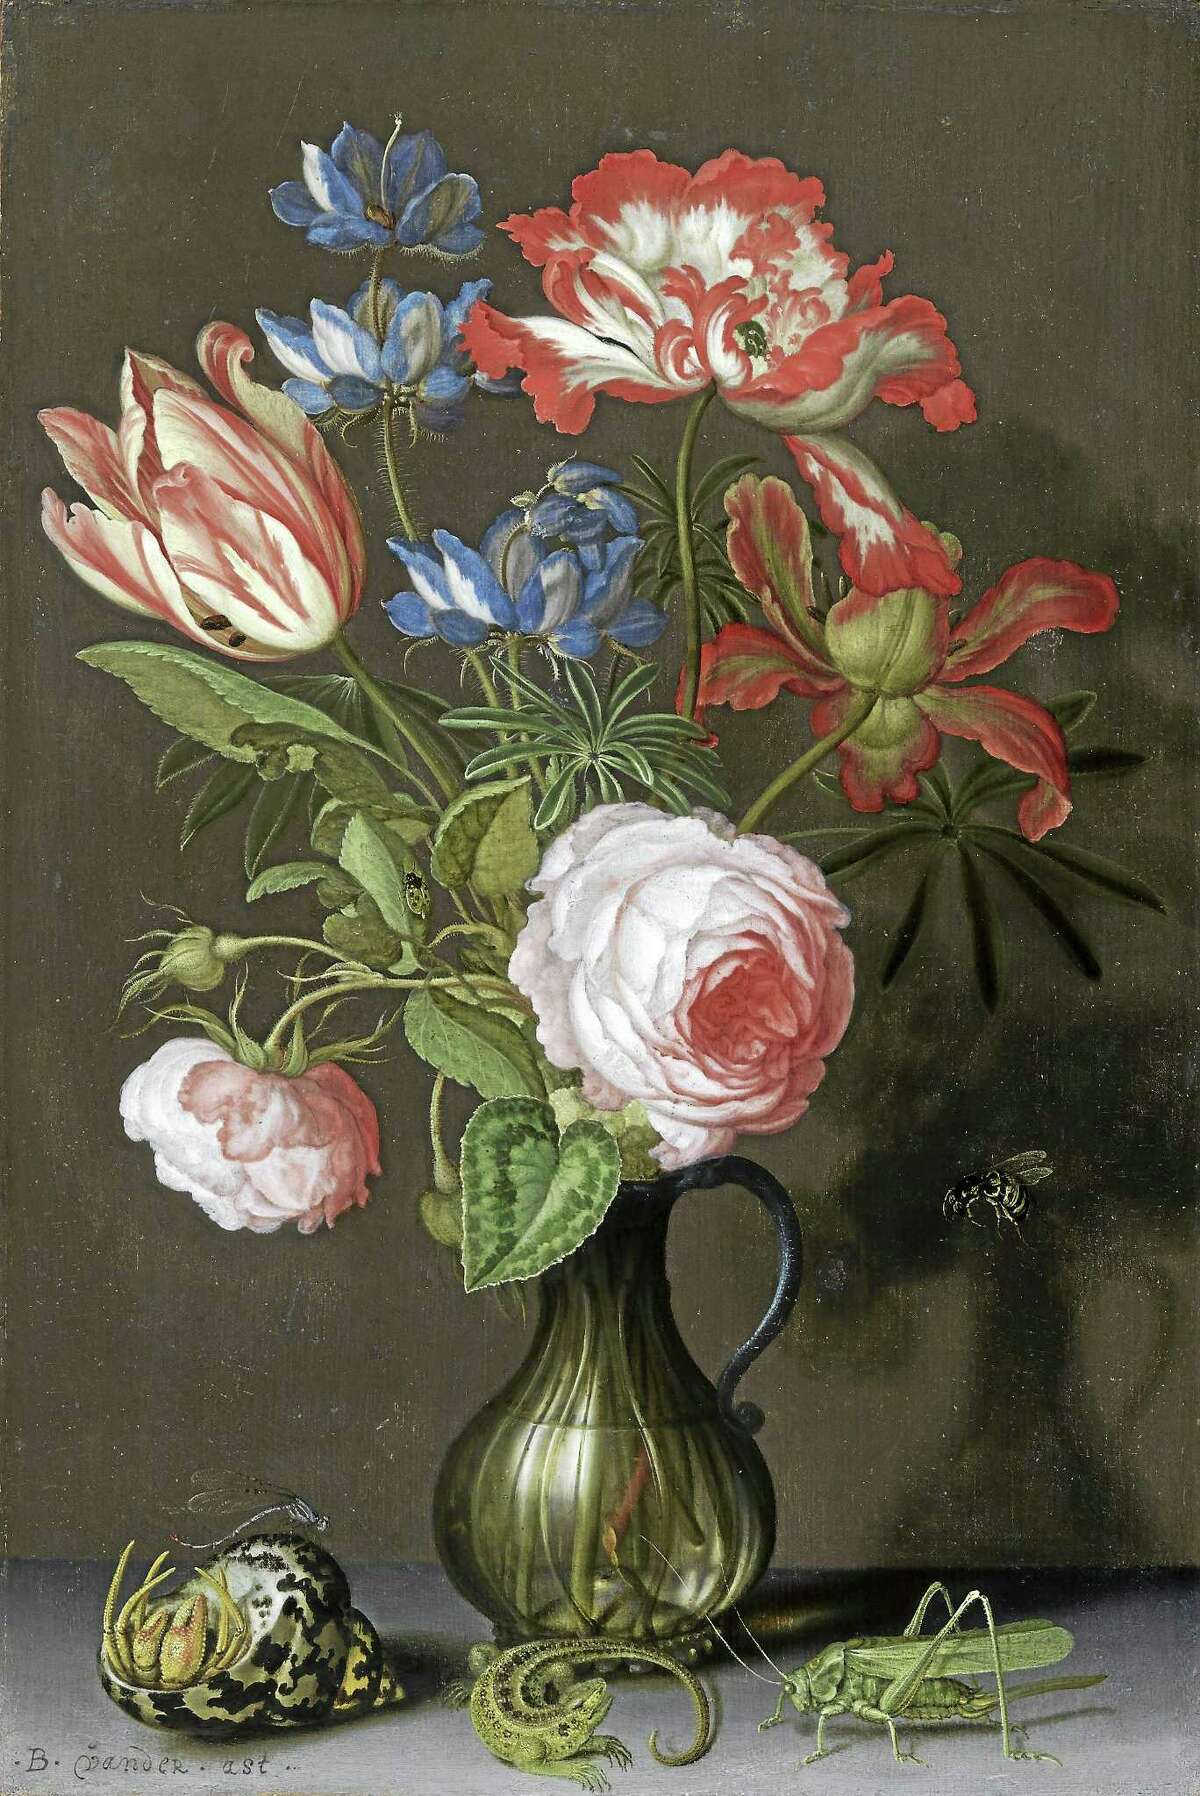 Balthasar van der Ast’s “Still Life with Flowers,” ca. 1630, oil on panel from the Rose-Marie and Eijk van Otterloo Collection.